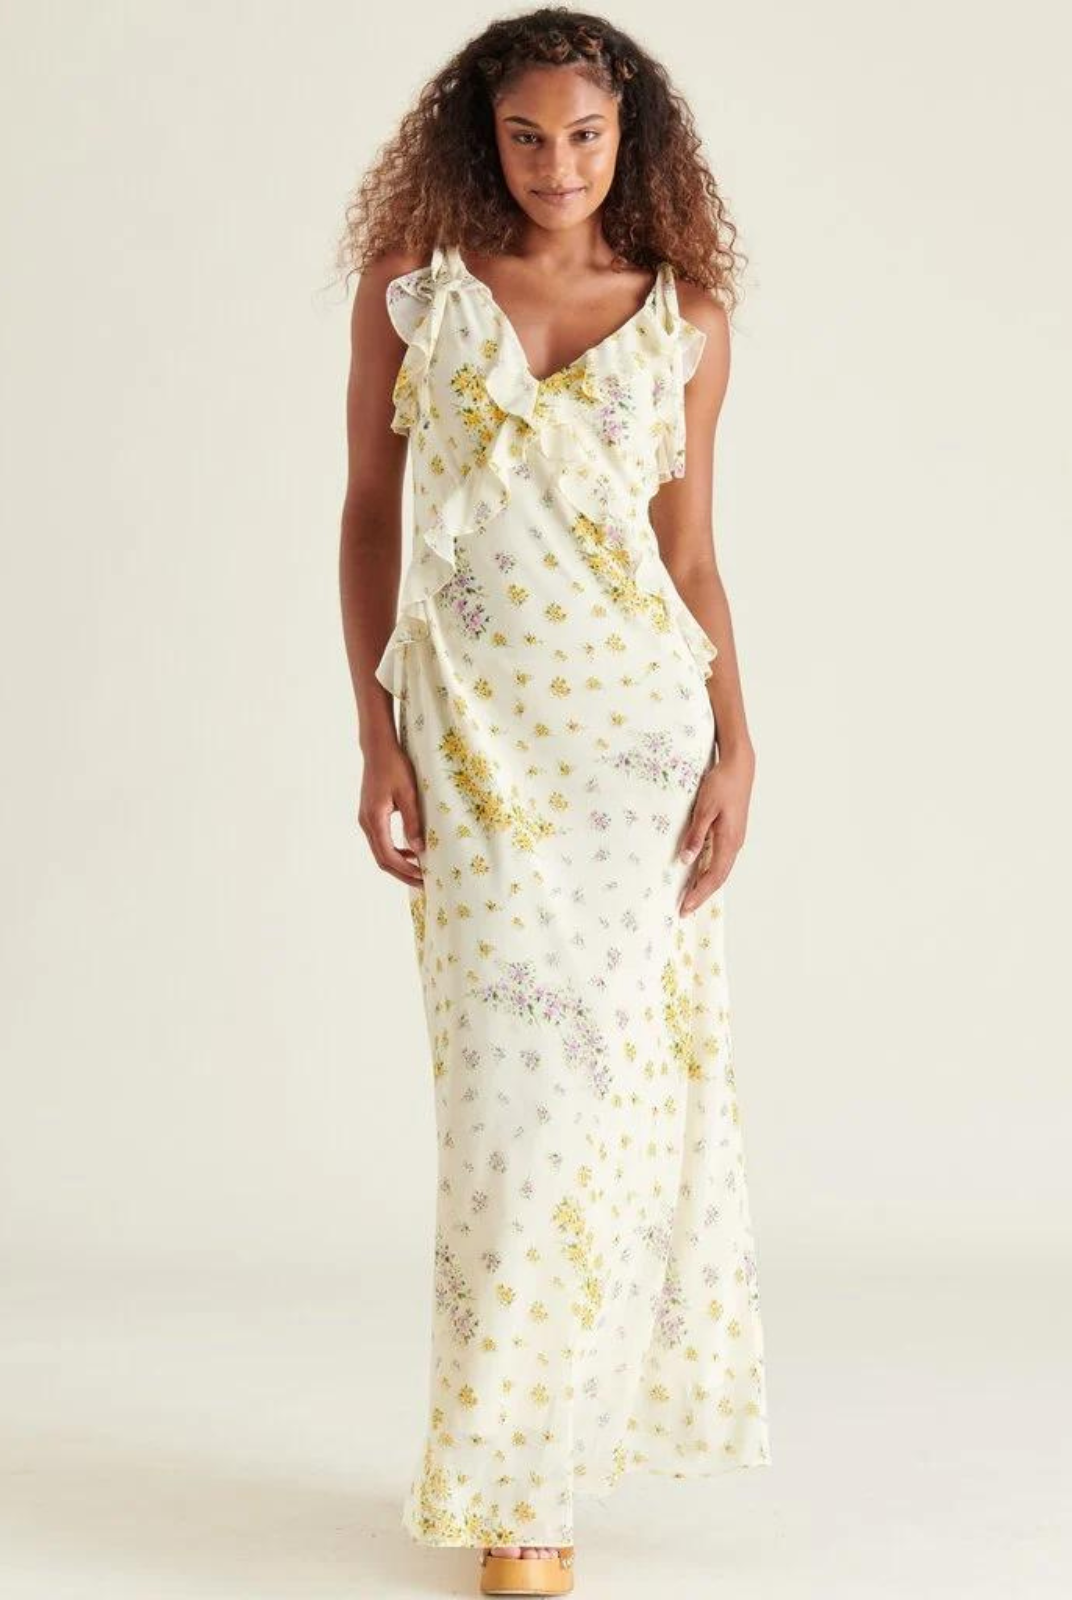 Steve Madden Adalina Dress. Be the center of attention in the stunning ADALINA dress. This desert floral printed chiffon dress features a v-neckline and ruffle detail that will make you stand out on any occasion. With its sleeveless design, this multicolor maxi dress is the perfect addition to your spring wardrobe.